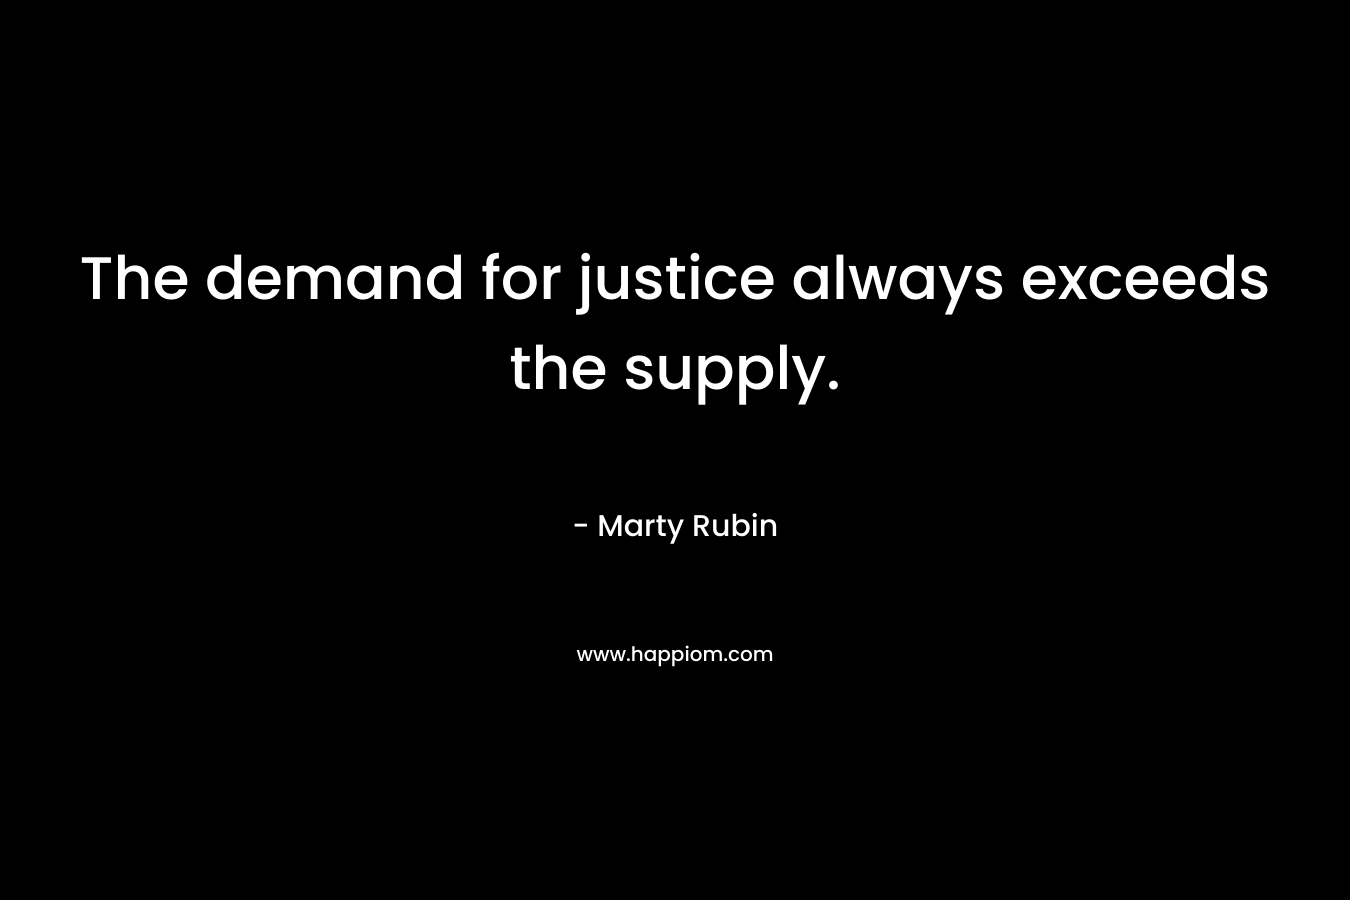 The demand for justice always exceeds the supply.